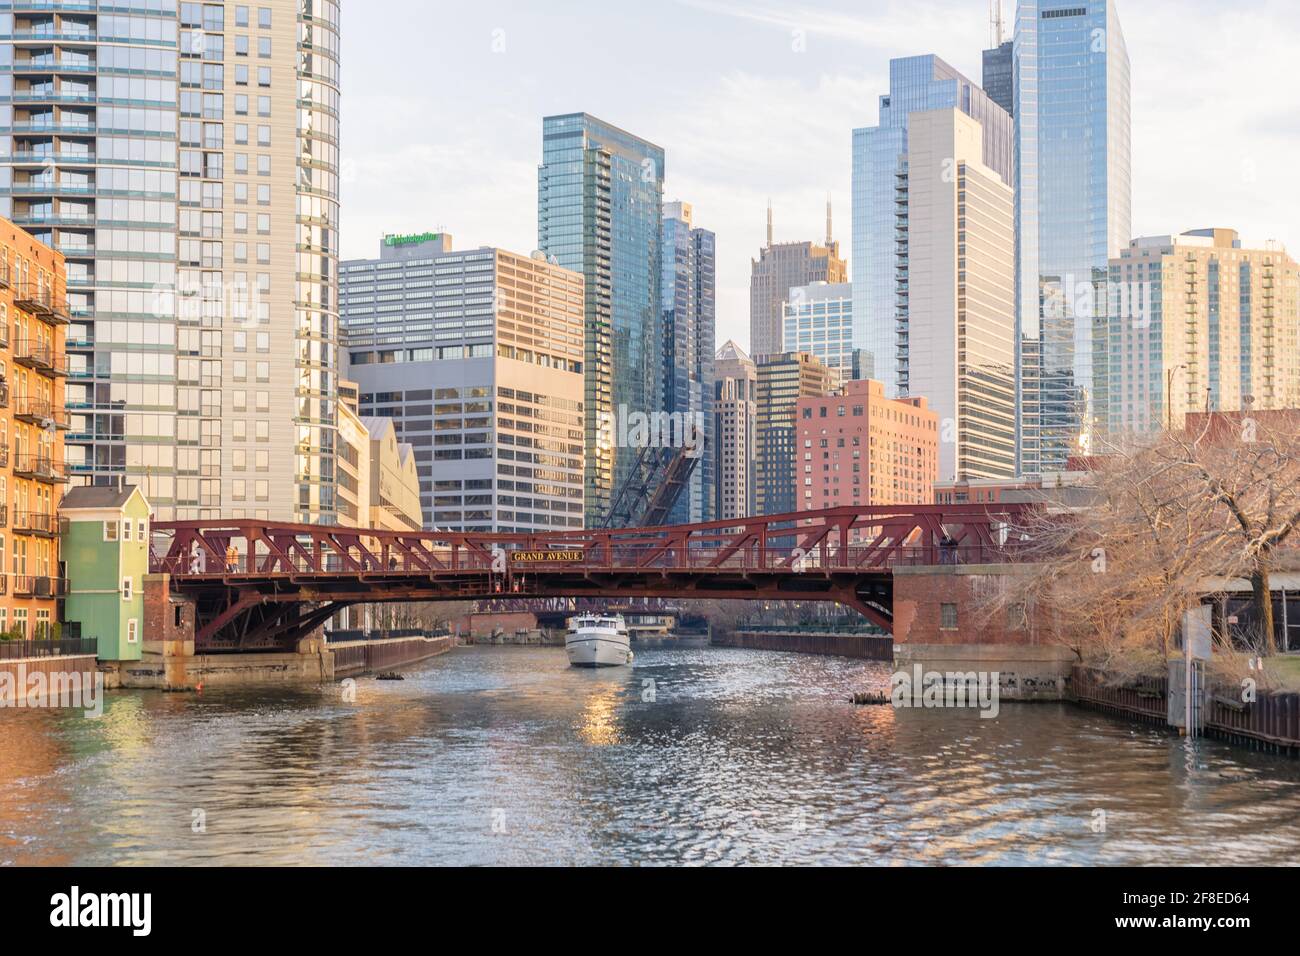 Panoramic Image of Grand Avenue's Drawbridge Taken from the Chicago River with the Chicago Skyline in the Background. Stock Photo